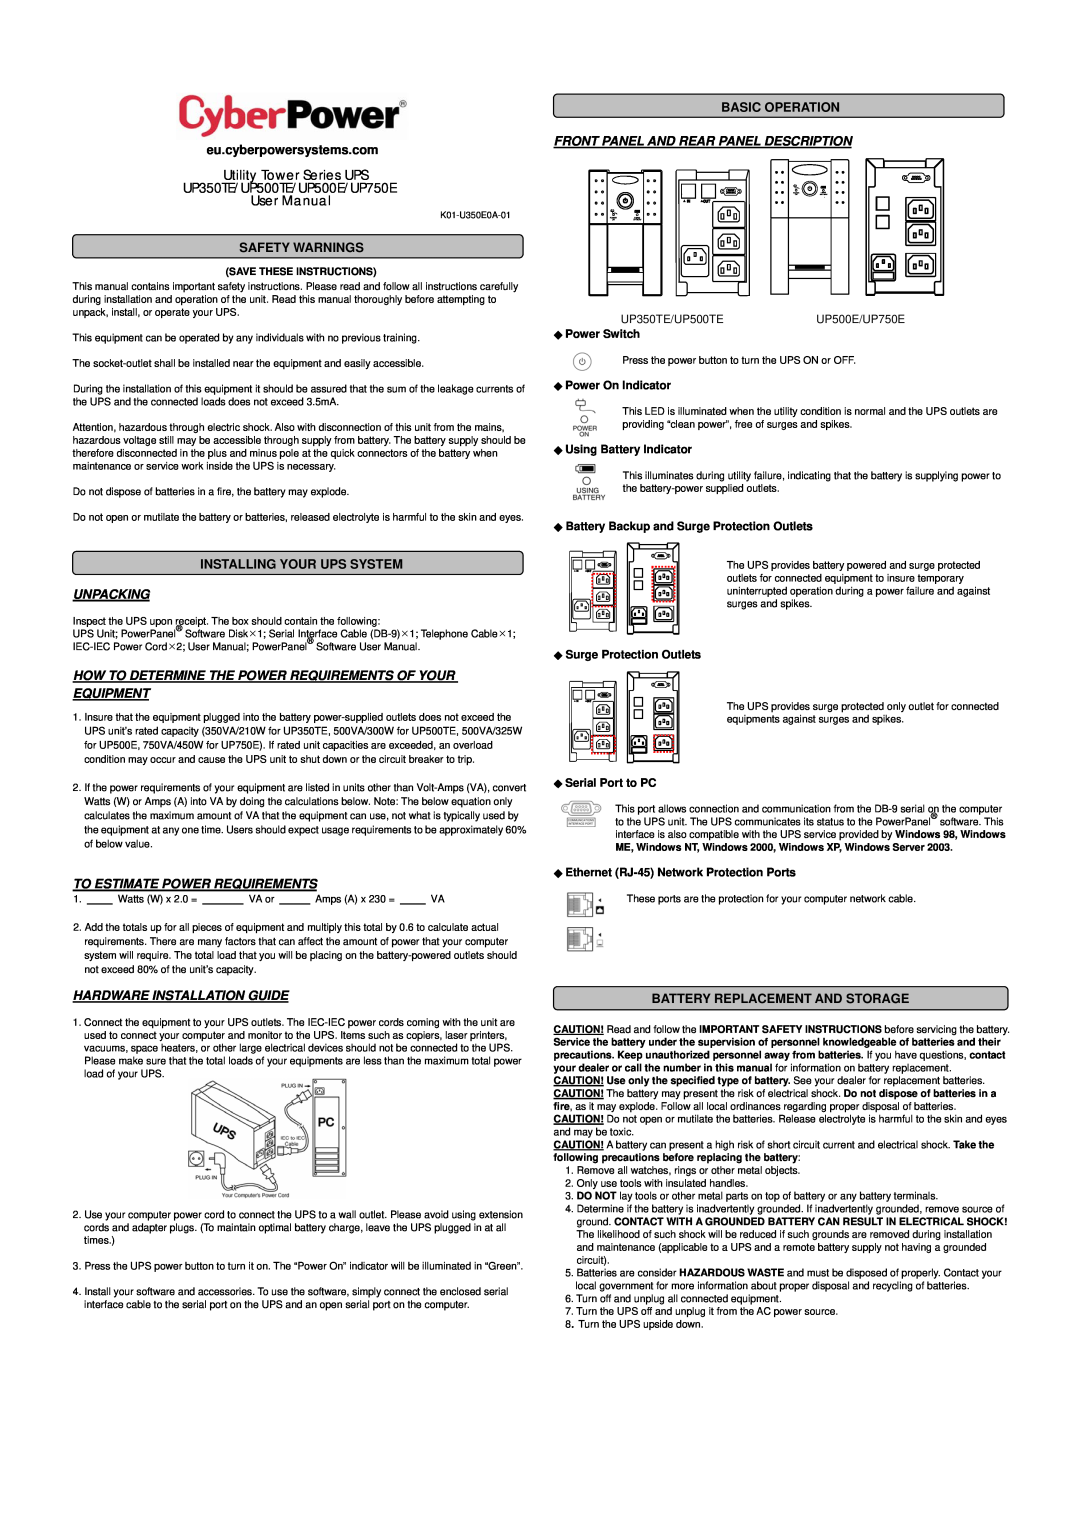 CyberPower Systems UP350TE user manual eu.cyberpowersystems.com, Safety Warnings, Installing Your Ups System, Unpacking 